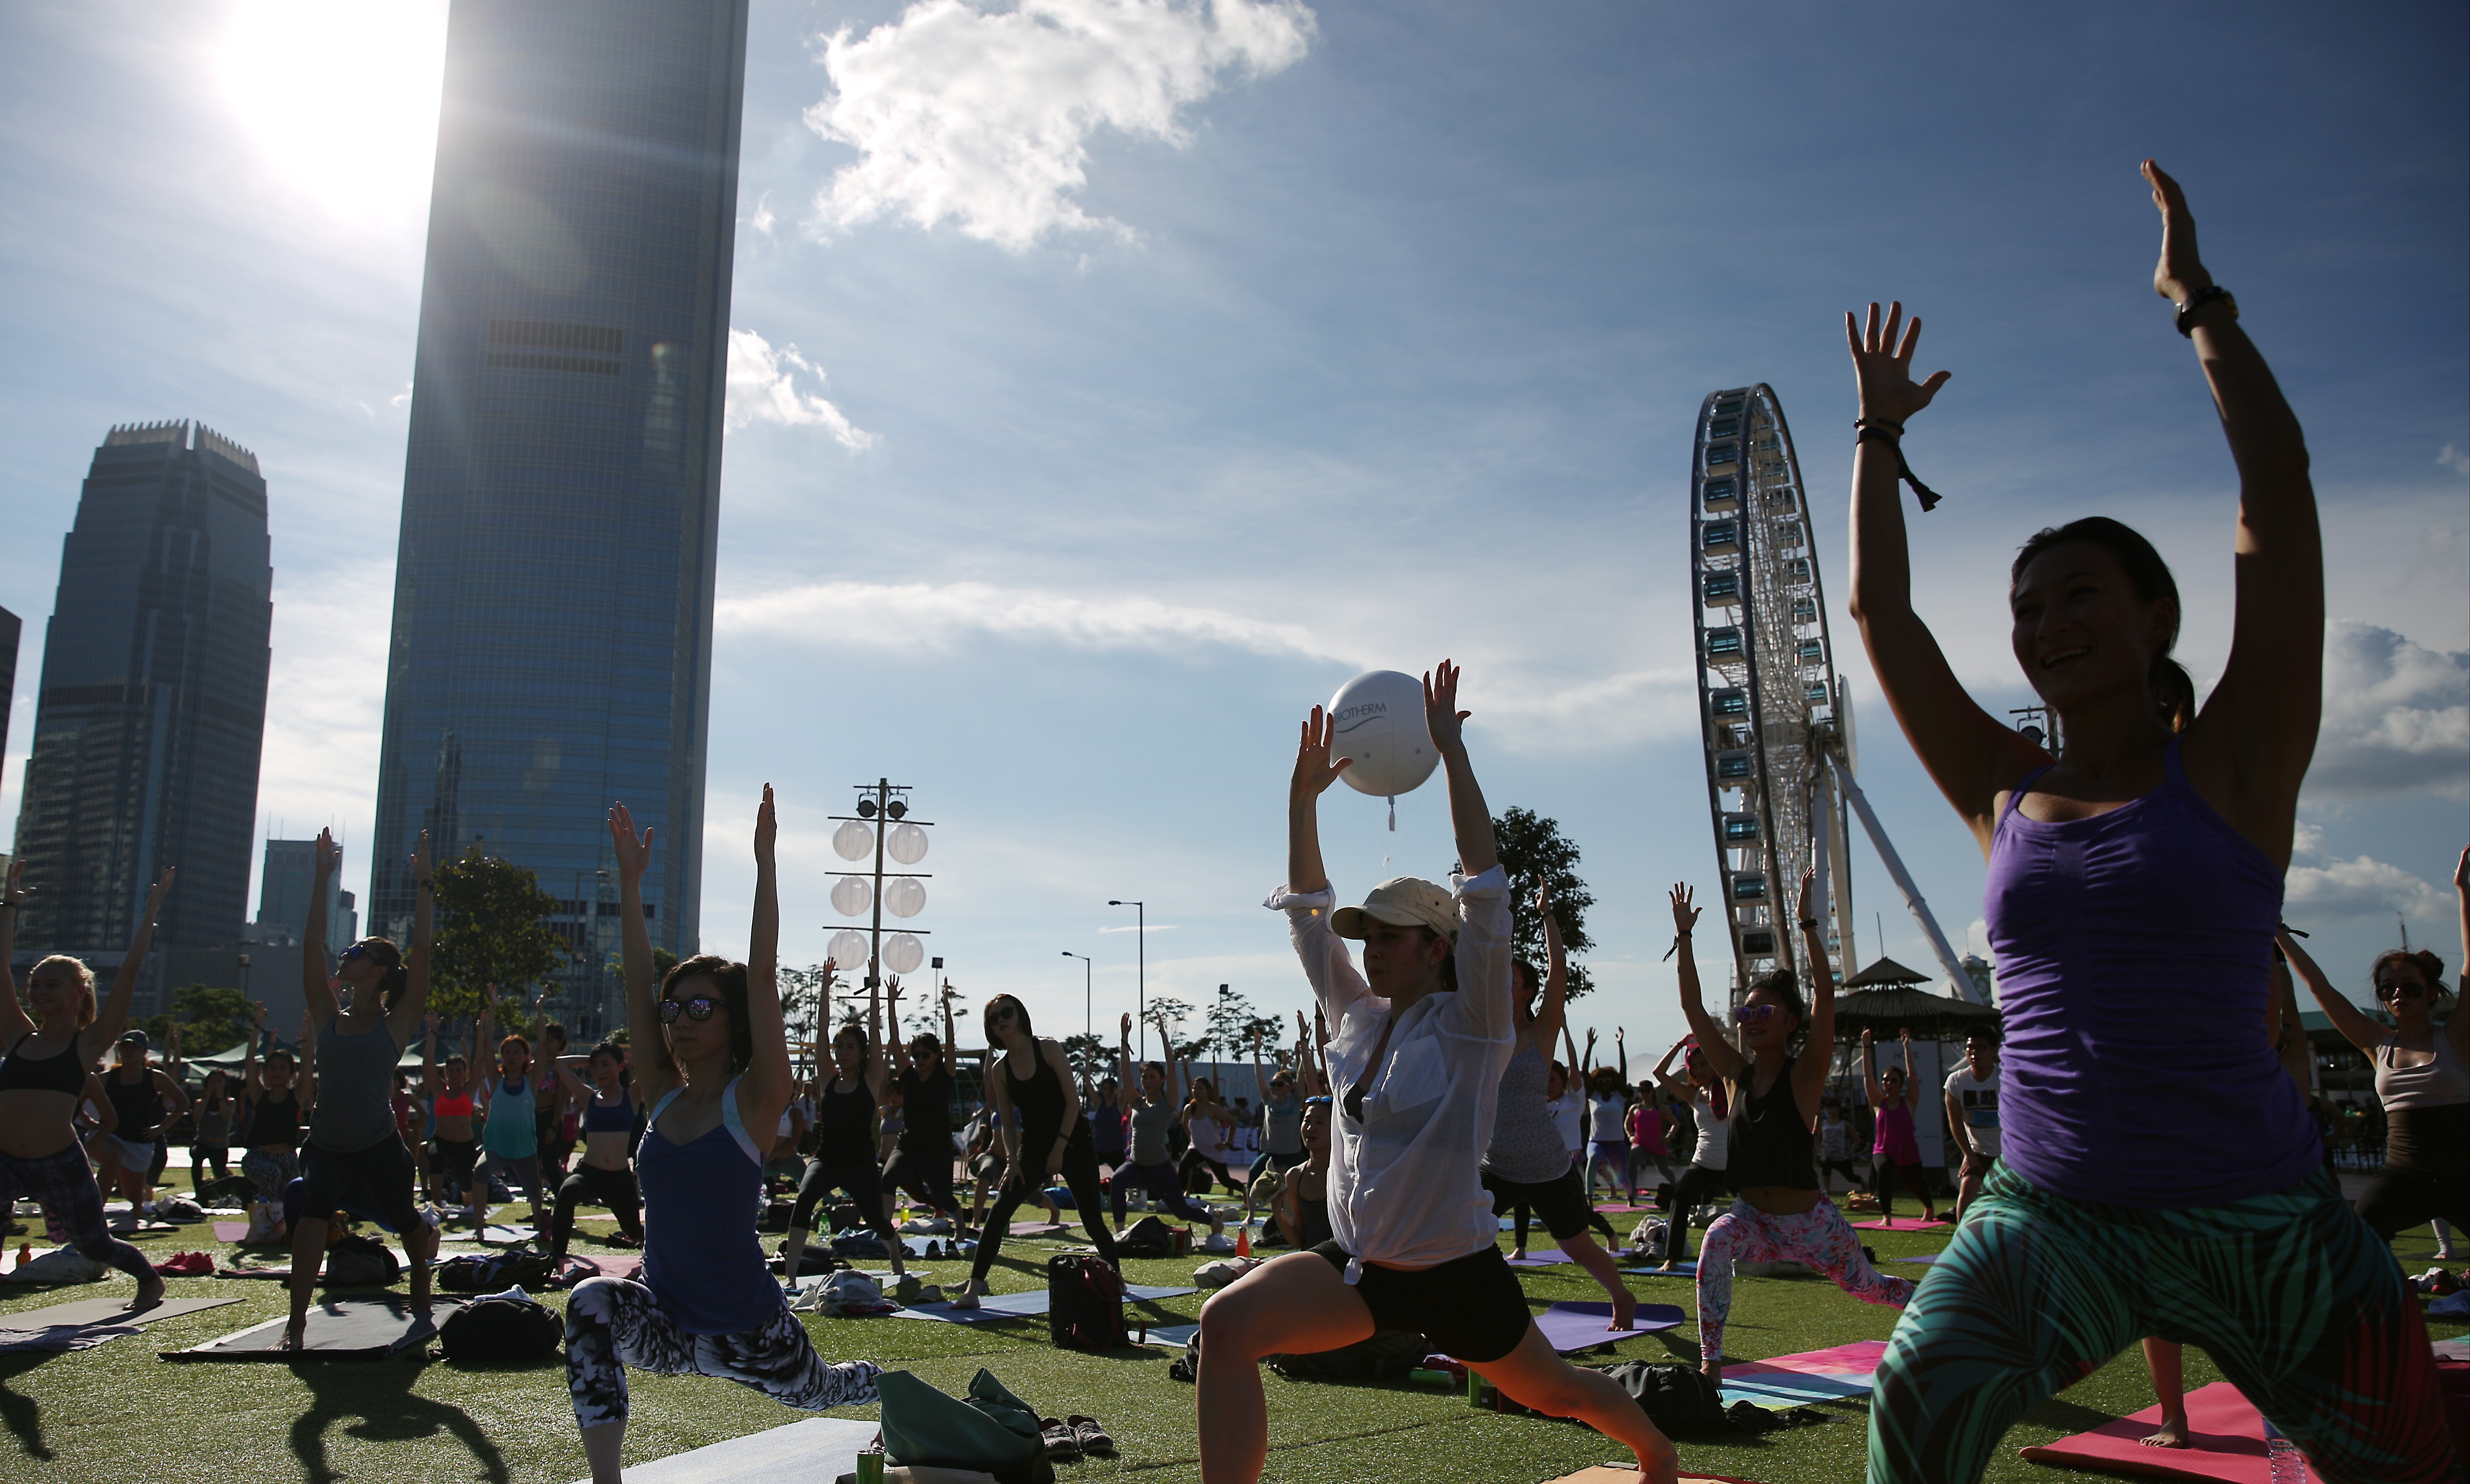 There are plenty of opportunities to do yoga in public places in Hong Kong with groups like HK Outdoor Yoga popping up at public parks. Photo: Sam Tsang